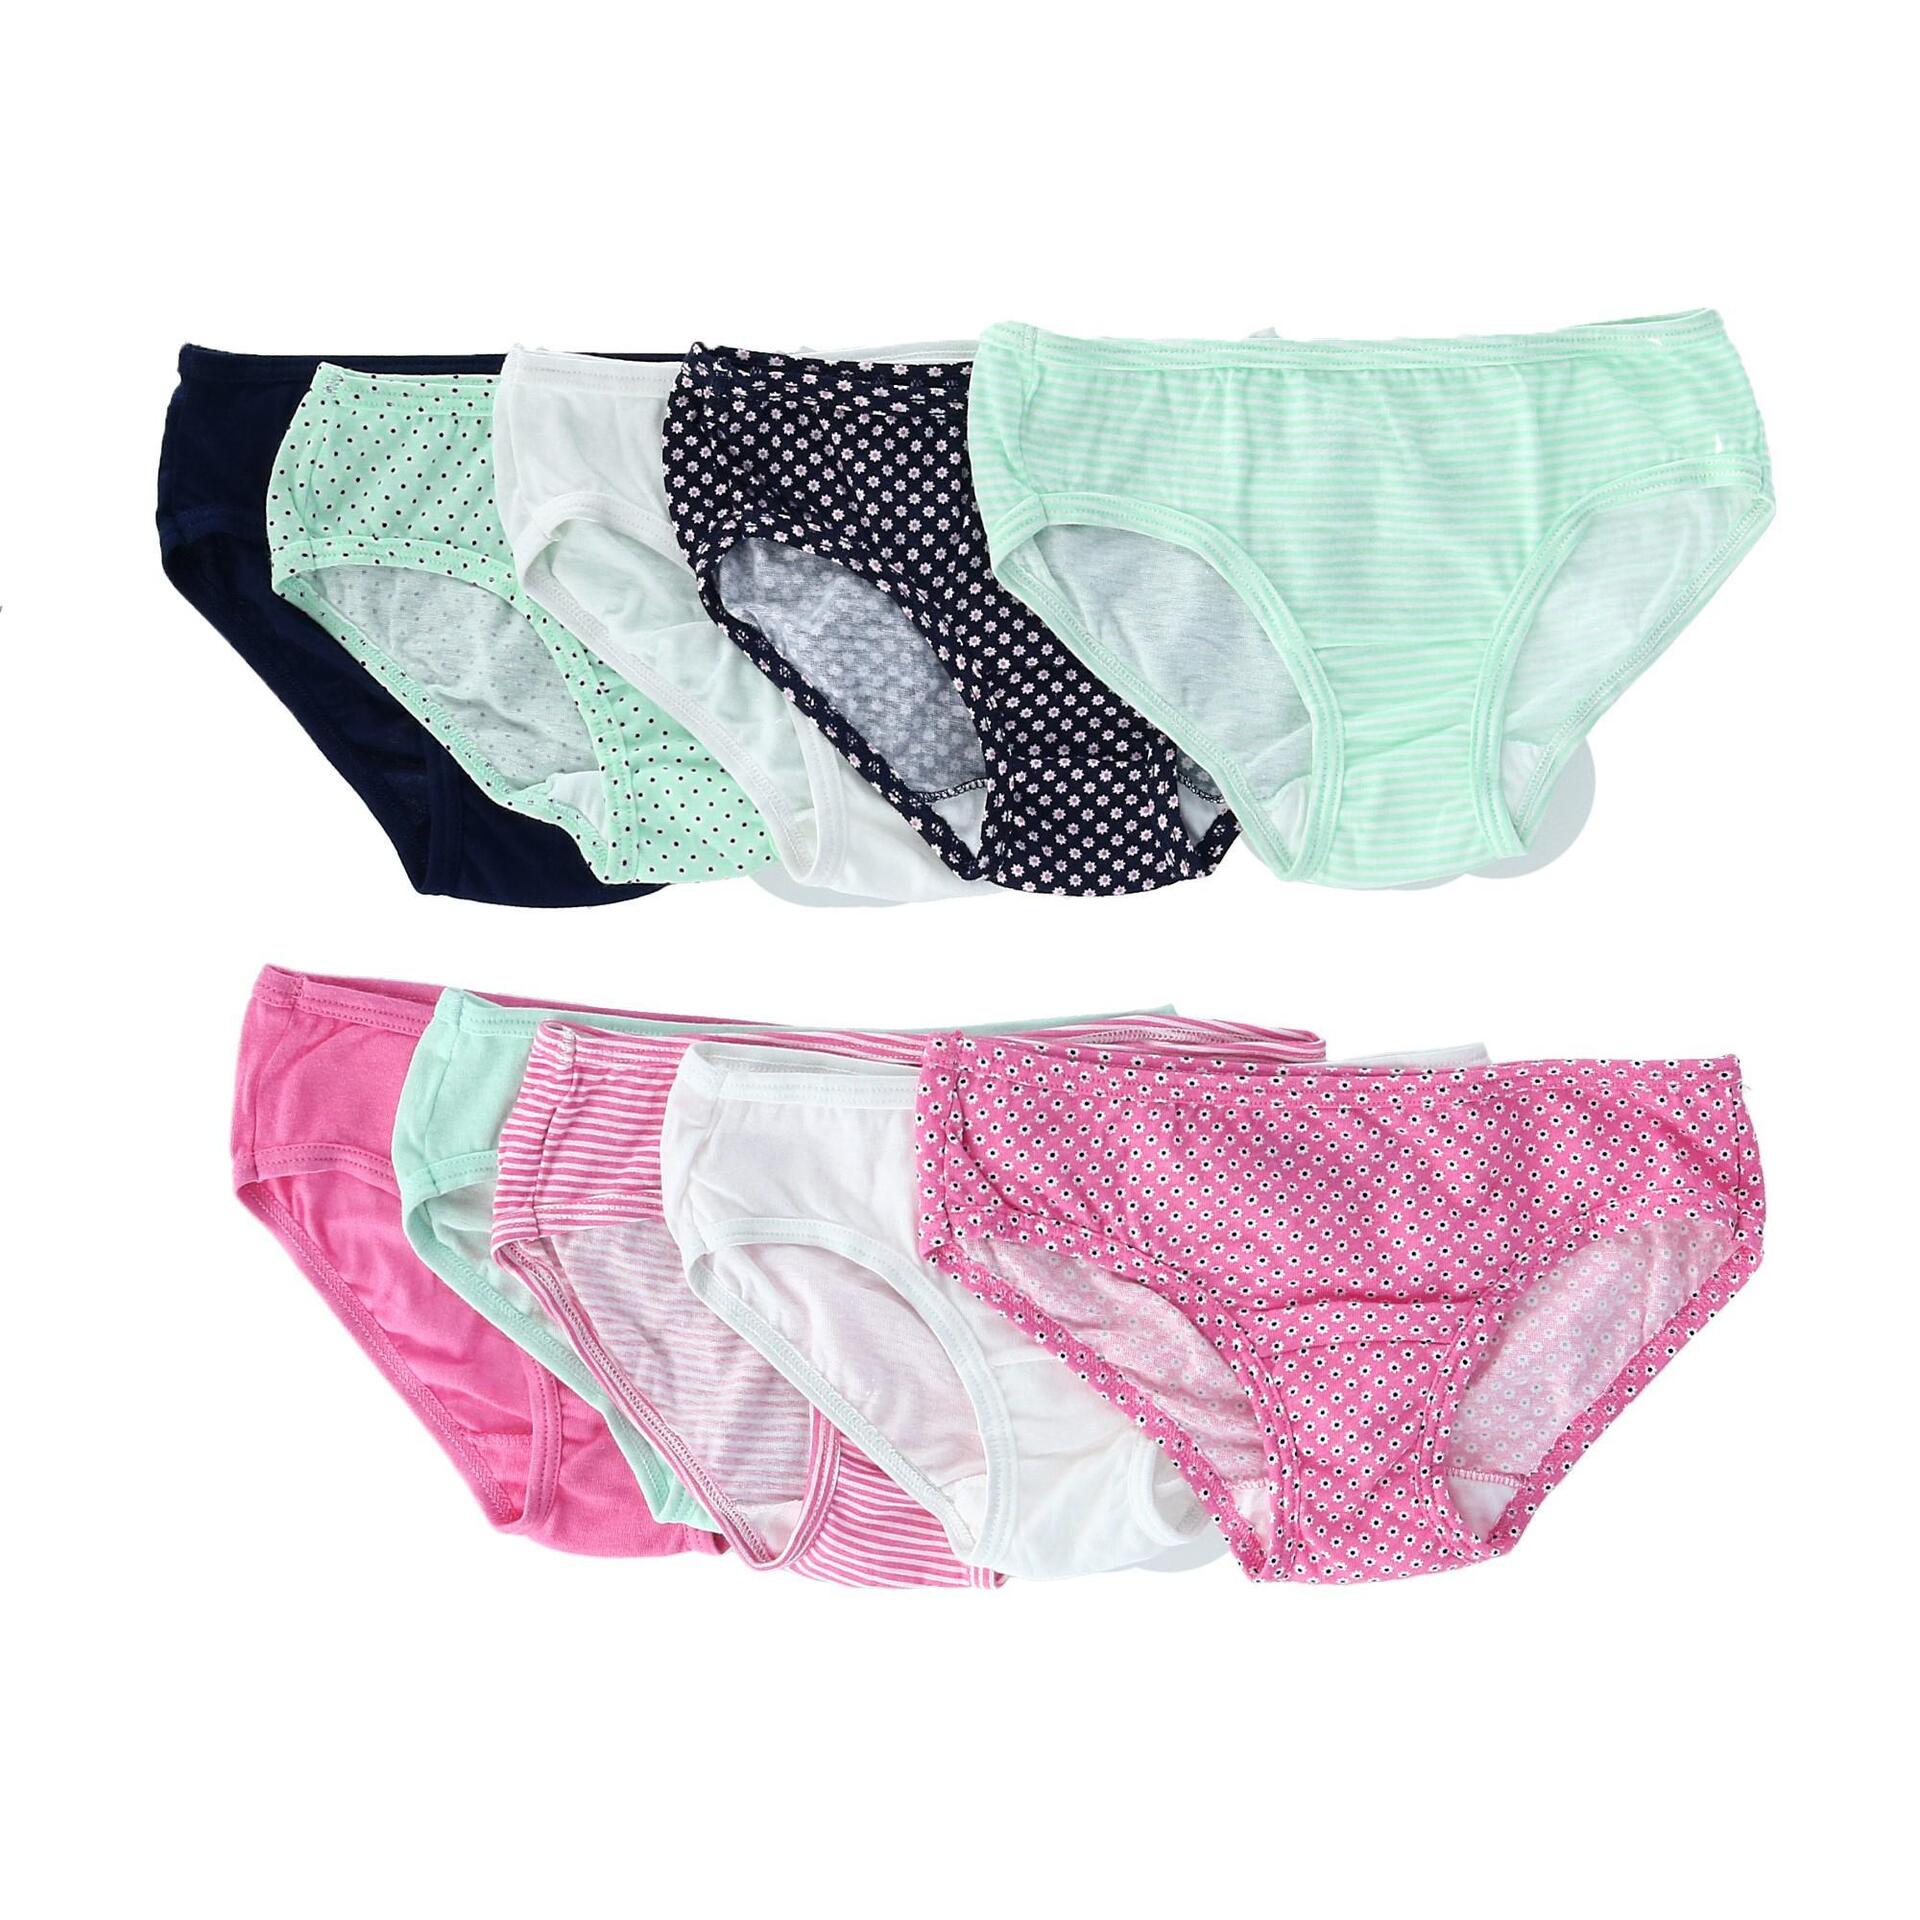 Fruit of the Loom Girl's Hipster Style Underwear (10 Pack) - Multi 4